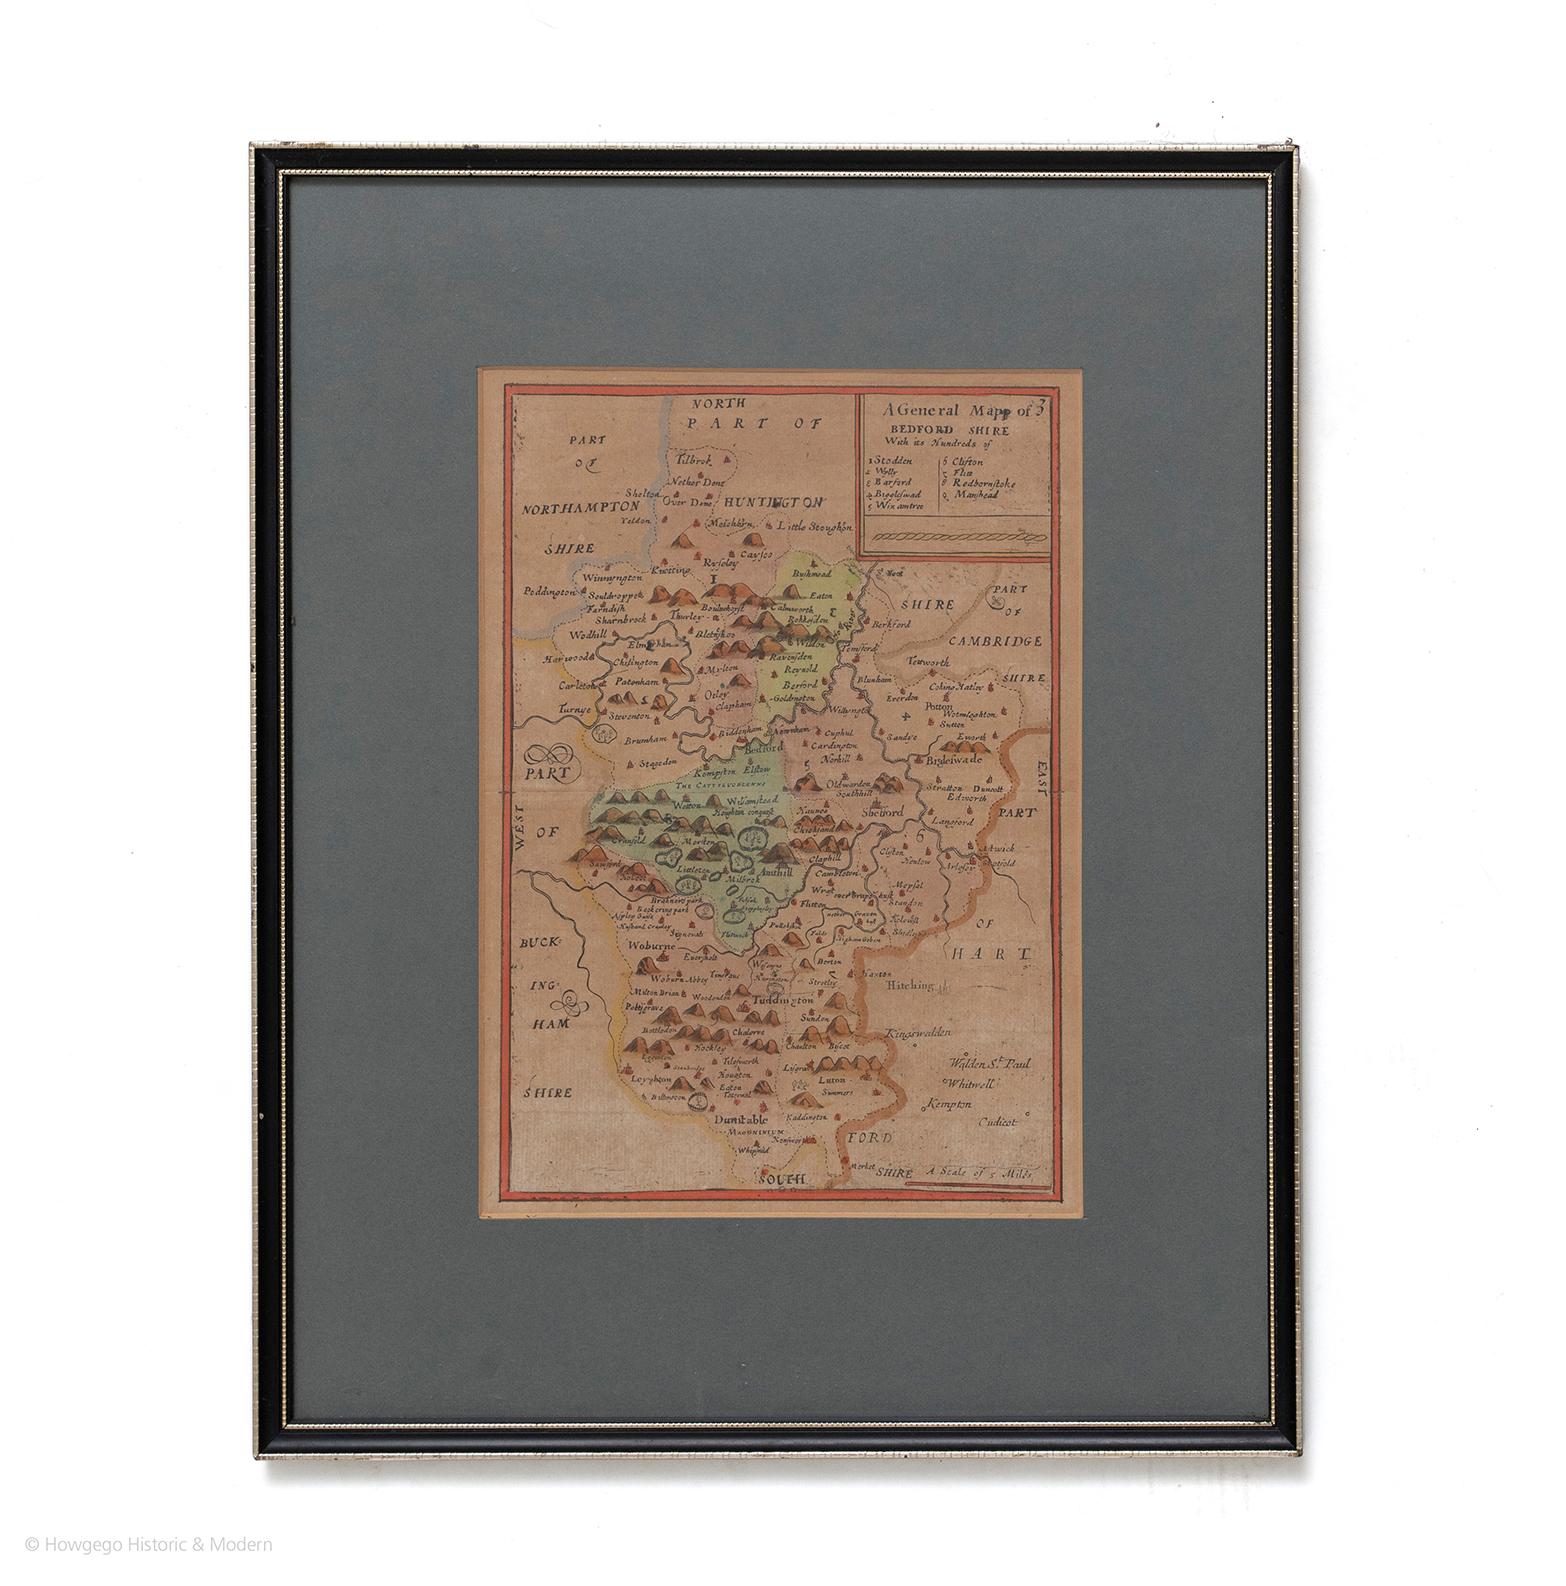 A general map of Bedfordshire with its hundreds. Measure: 37cm 14 1/2